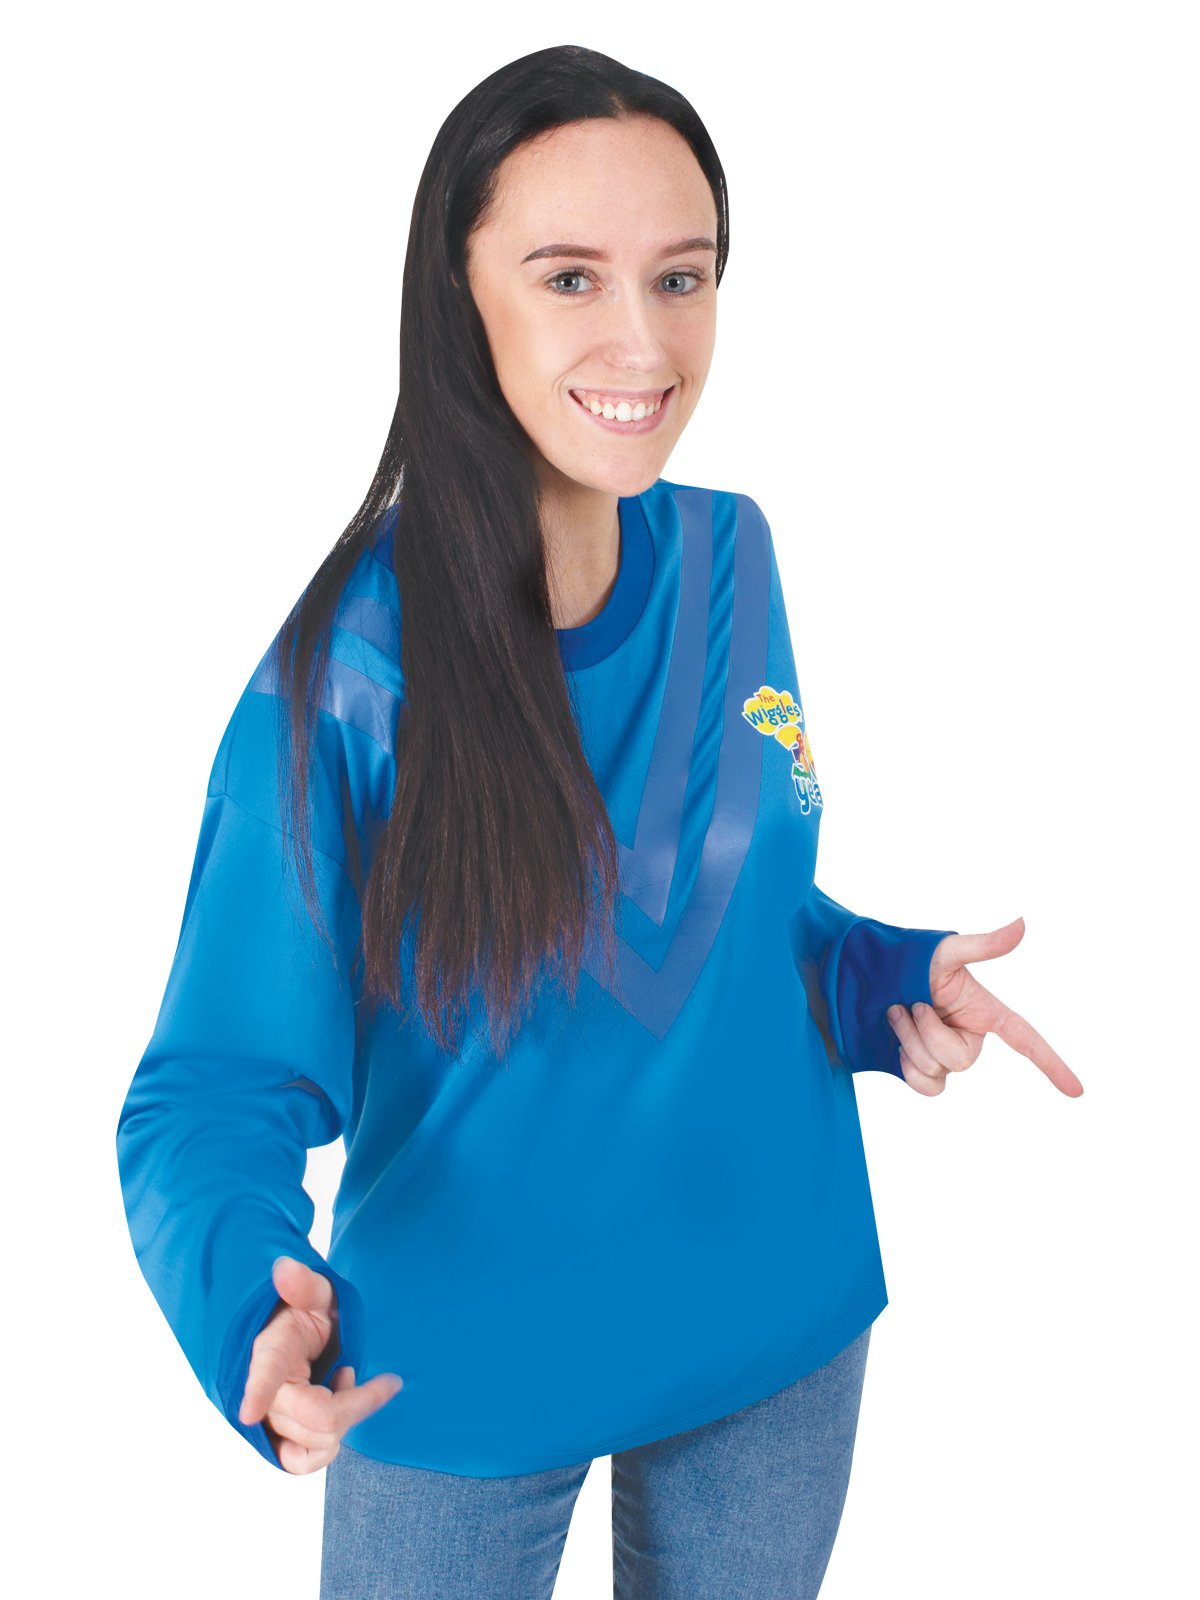 Costume Adult Anthony Wiggle Deluxe Blue Top STD